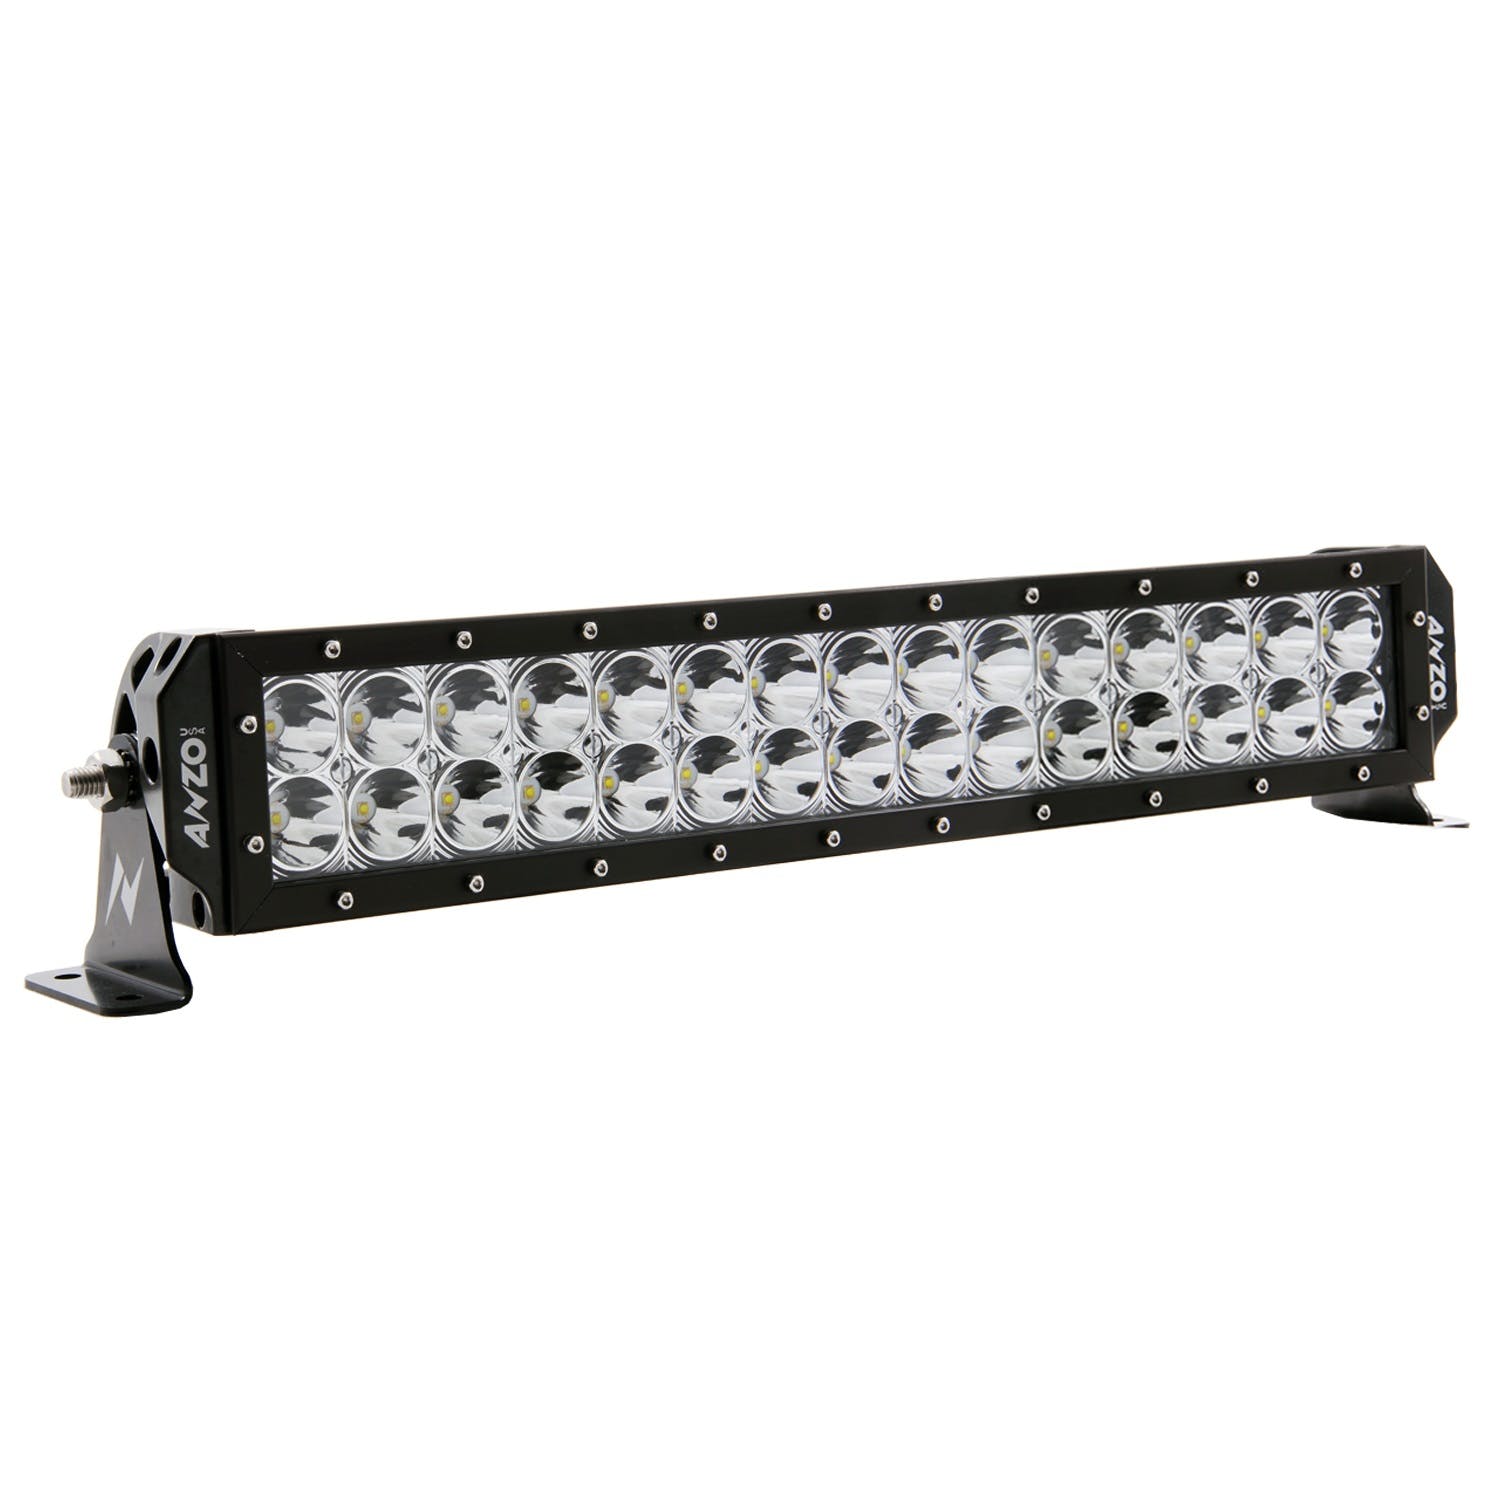 AnzoUSA 881033 Rugged Off Road Light 30" 3W High Intensity LED (Spot)